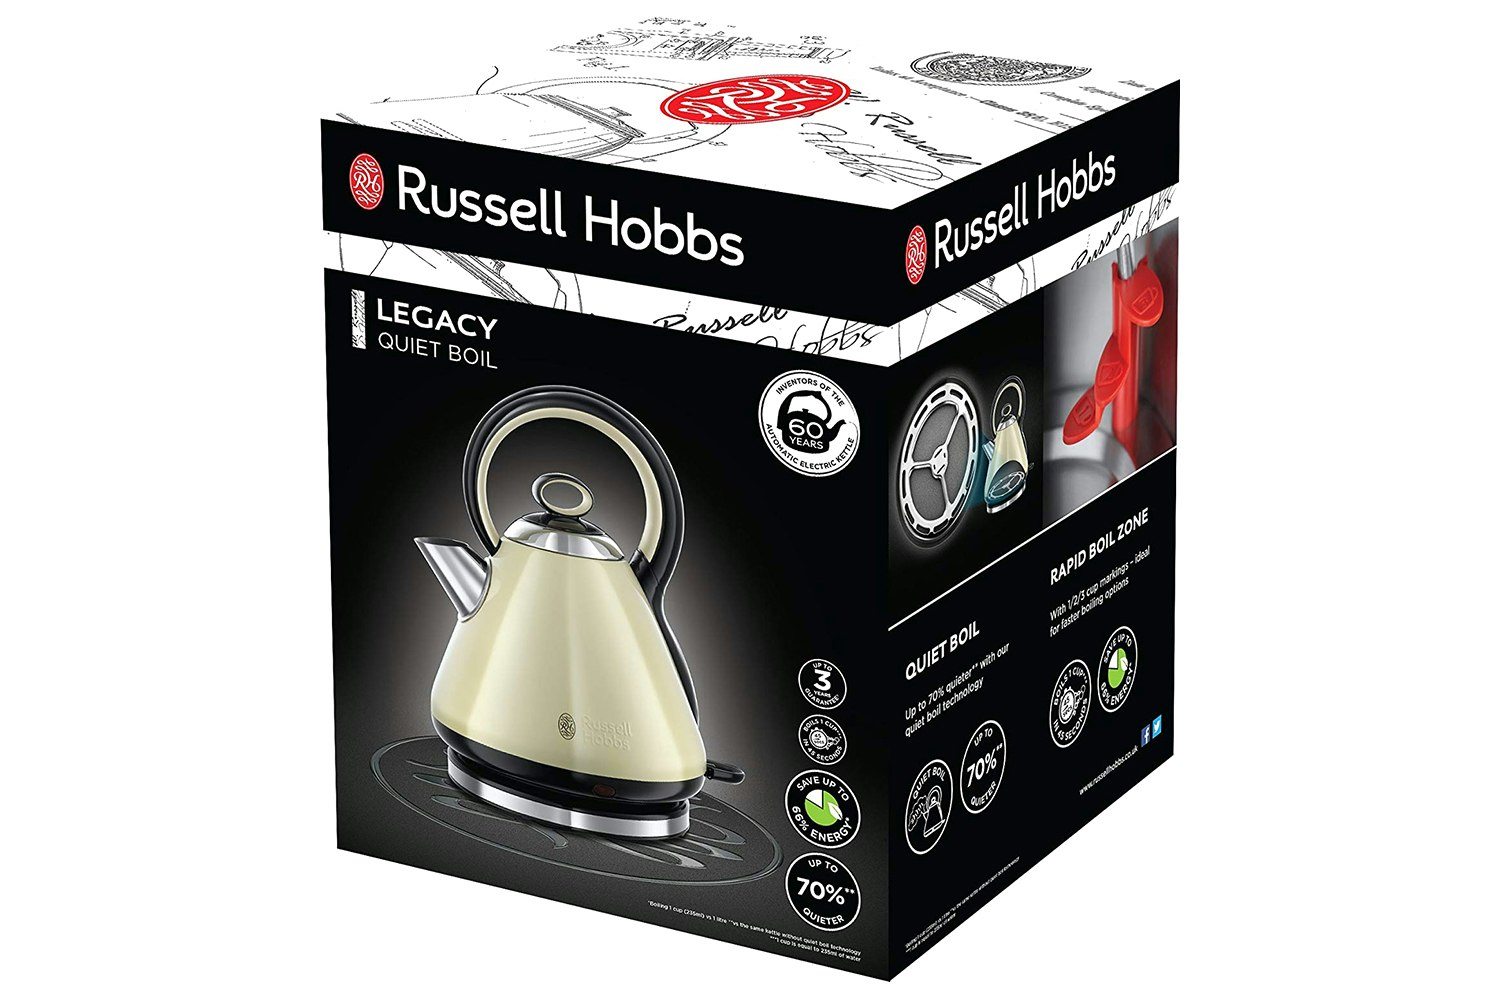 Russell Hobbs 21888 Legacy Quiet Boil Kettle Cream 1.7 Litre 3000 W